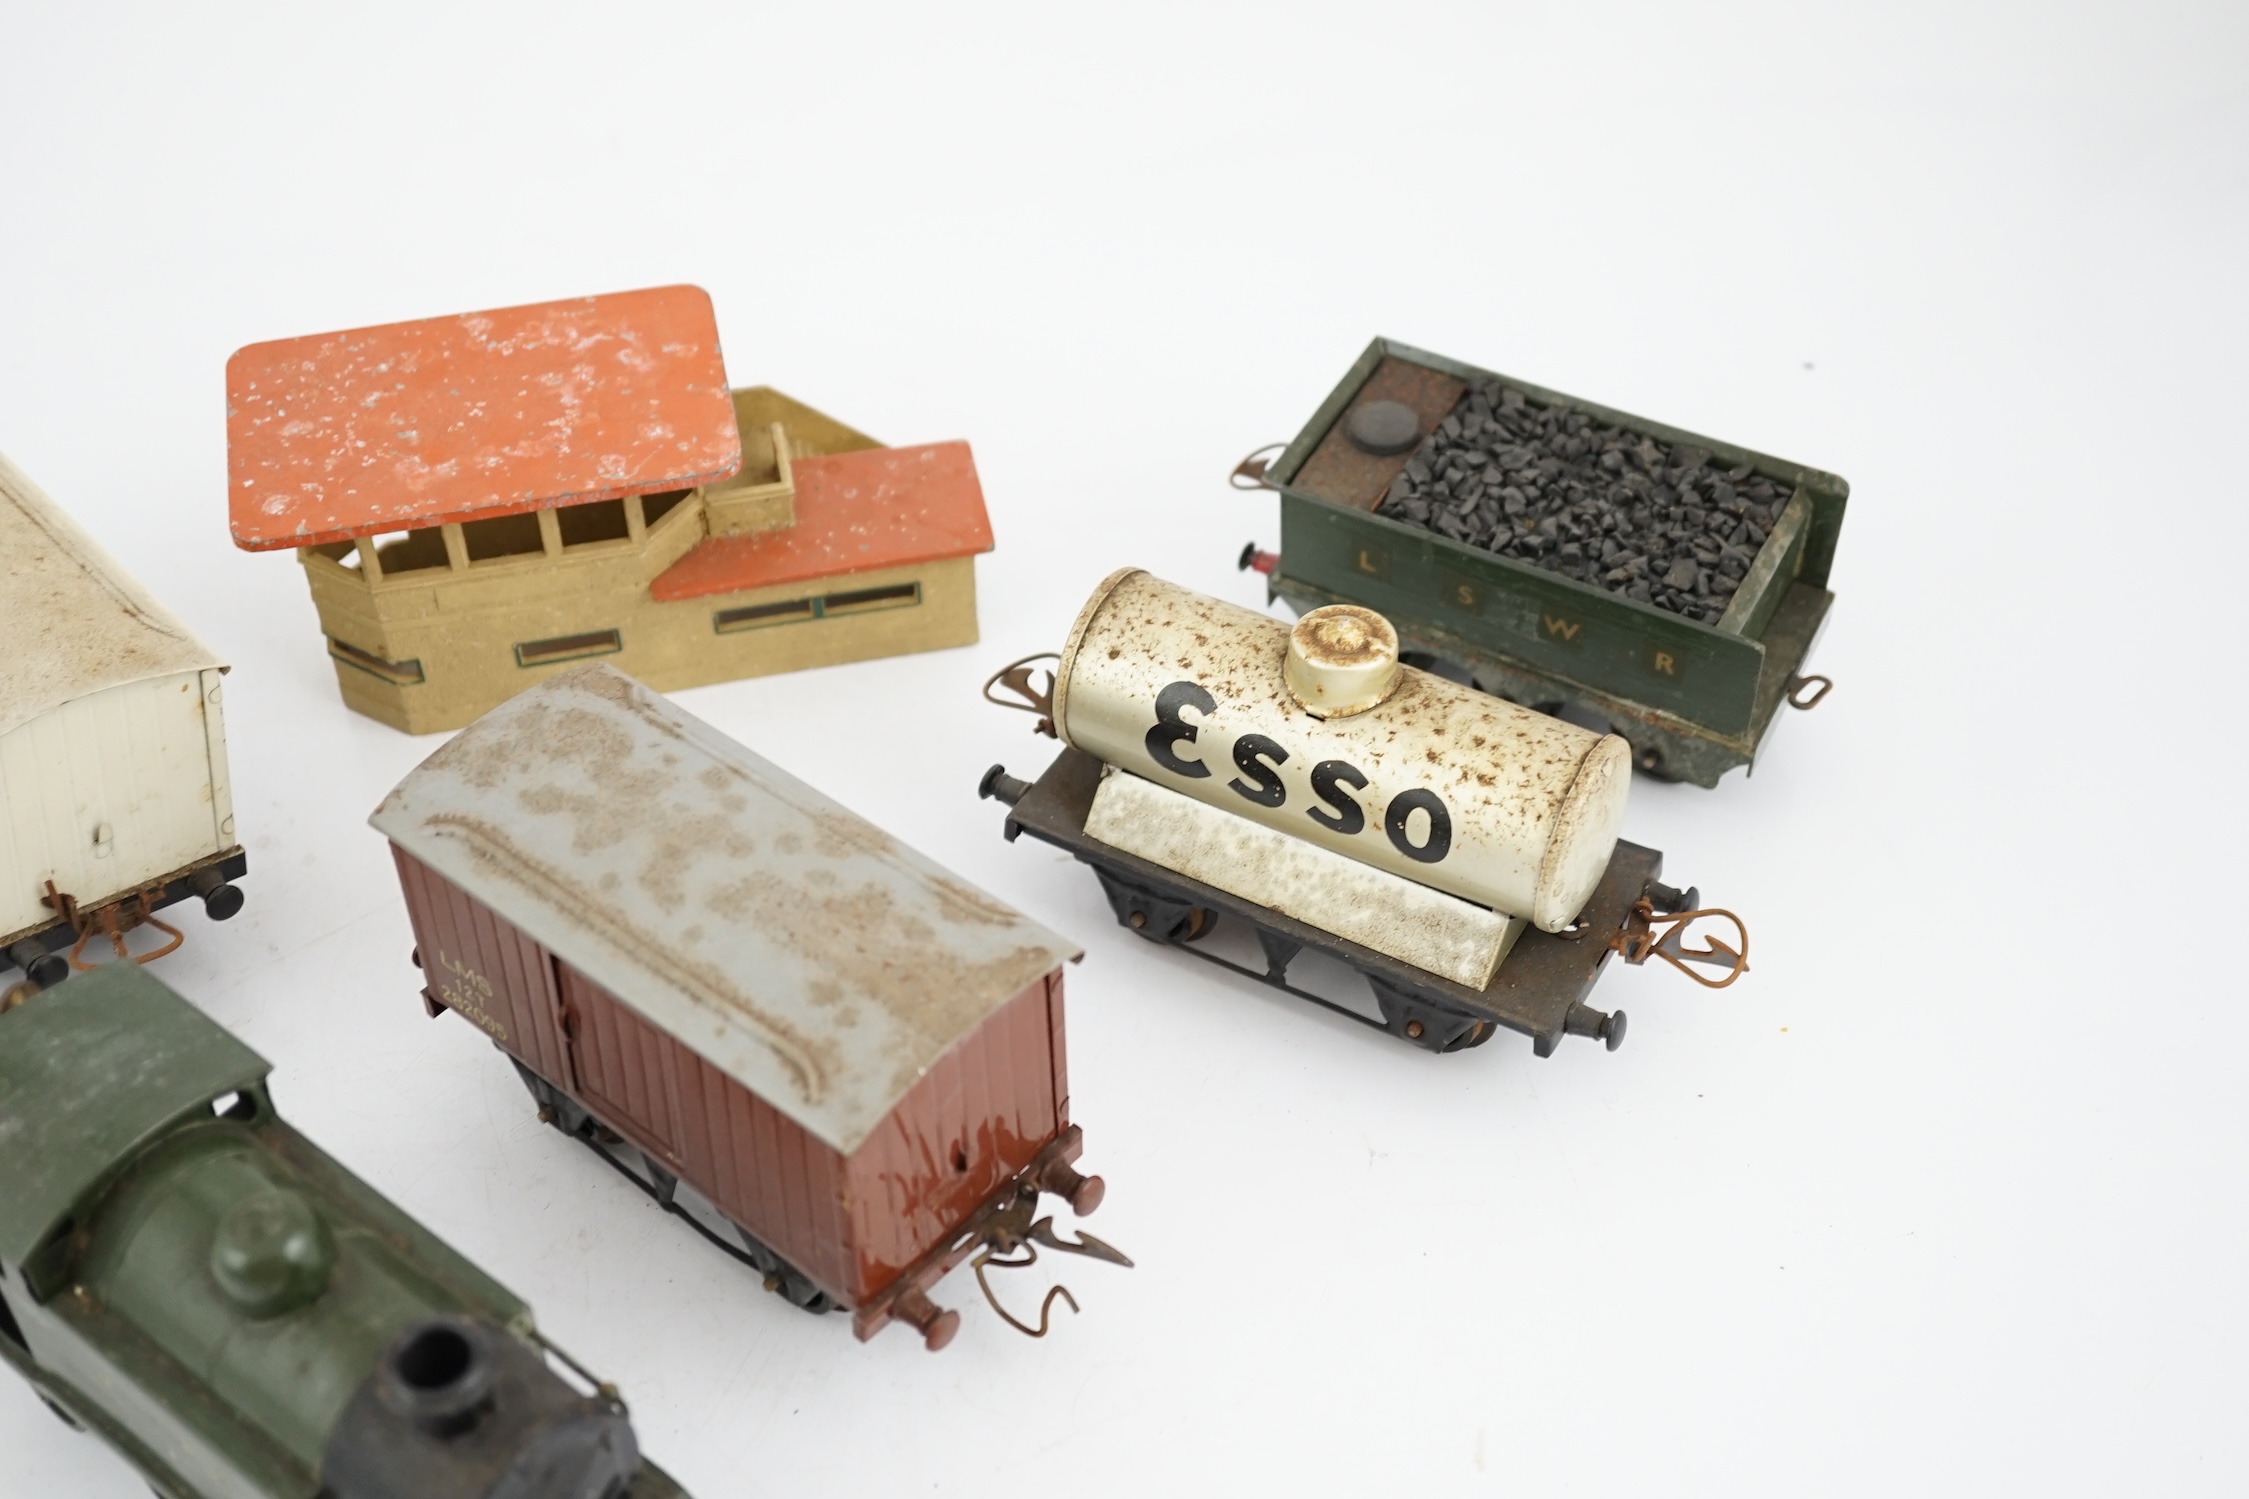 Fourteen 0 gauge tinplate etc. railway items, including three clockwork locomotives; an LSWR 4-4-0 tender loco, an SR 0-4-4T loco and an SR 0-4-2T loco, together with nine Hornby freight wagons, a Bing milk traffic van a